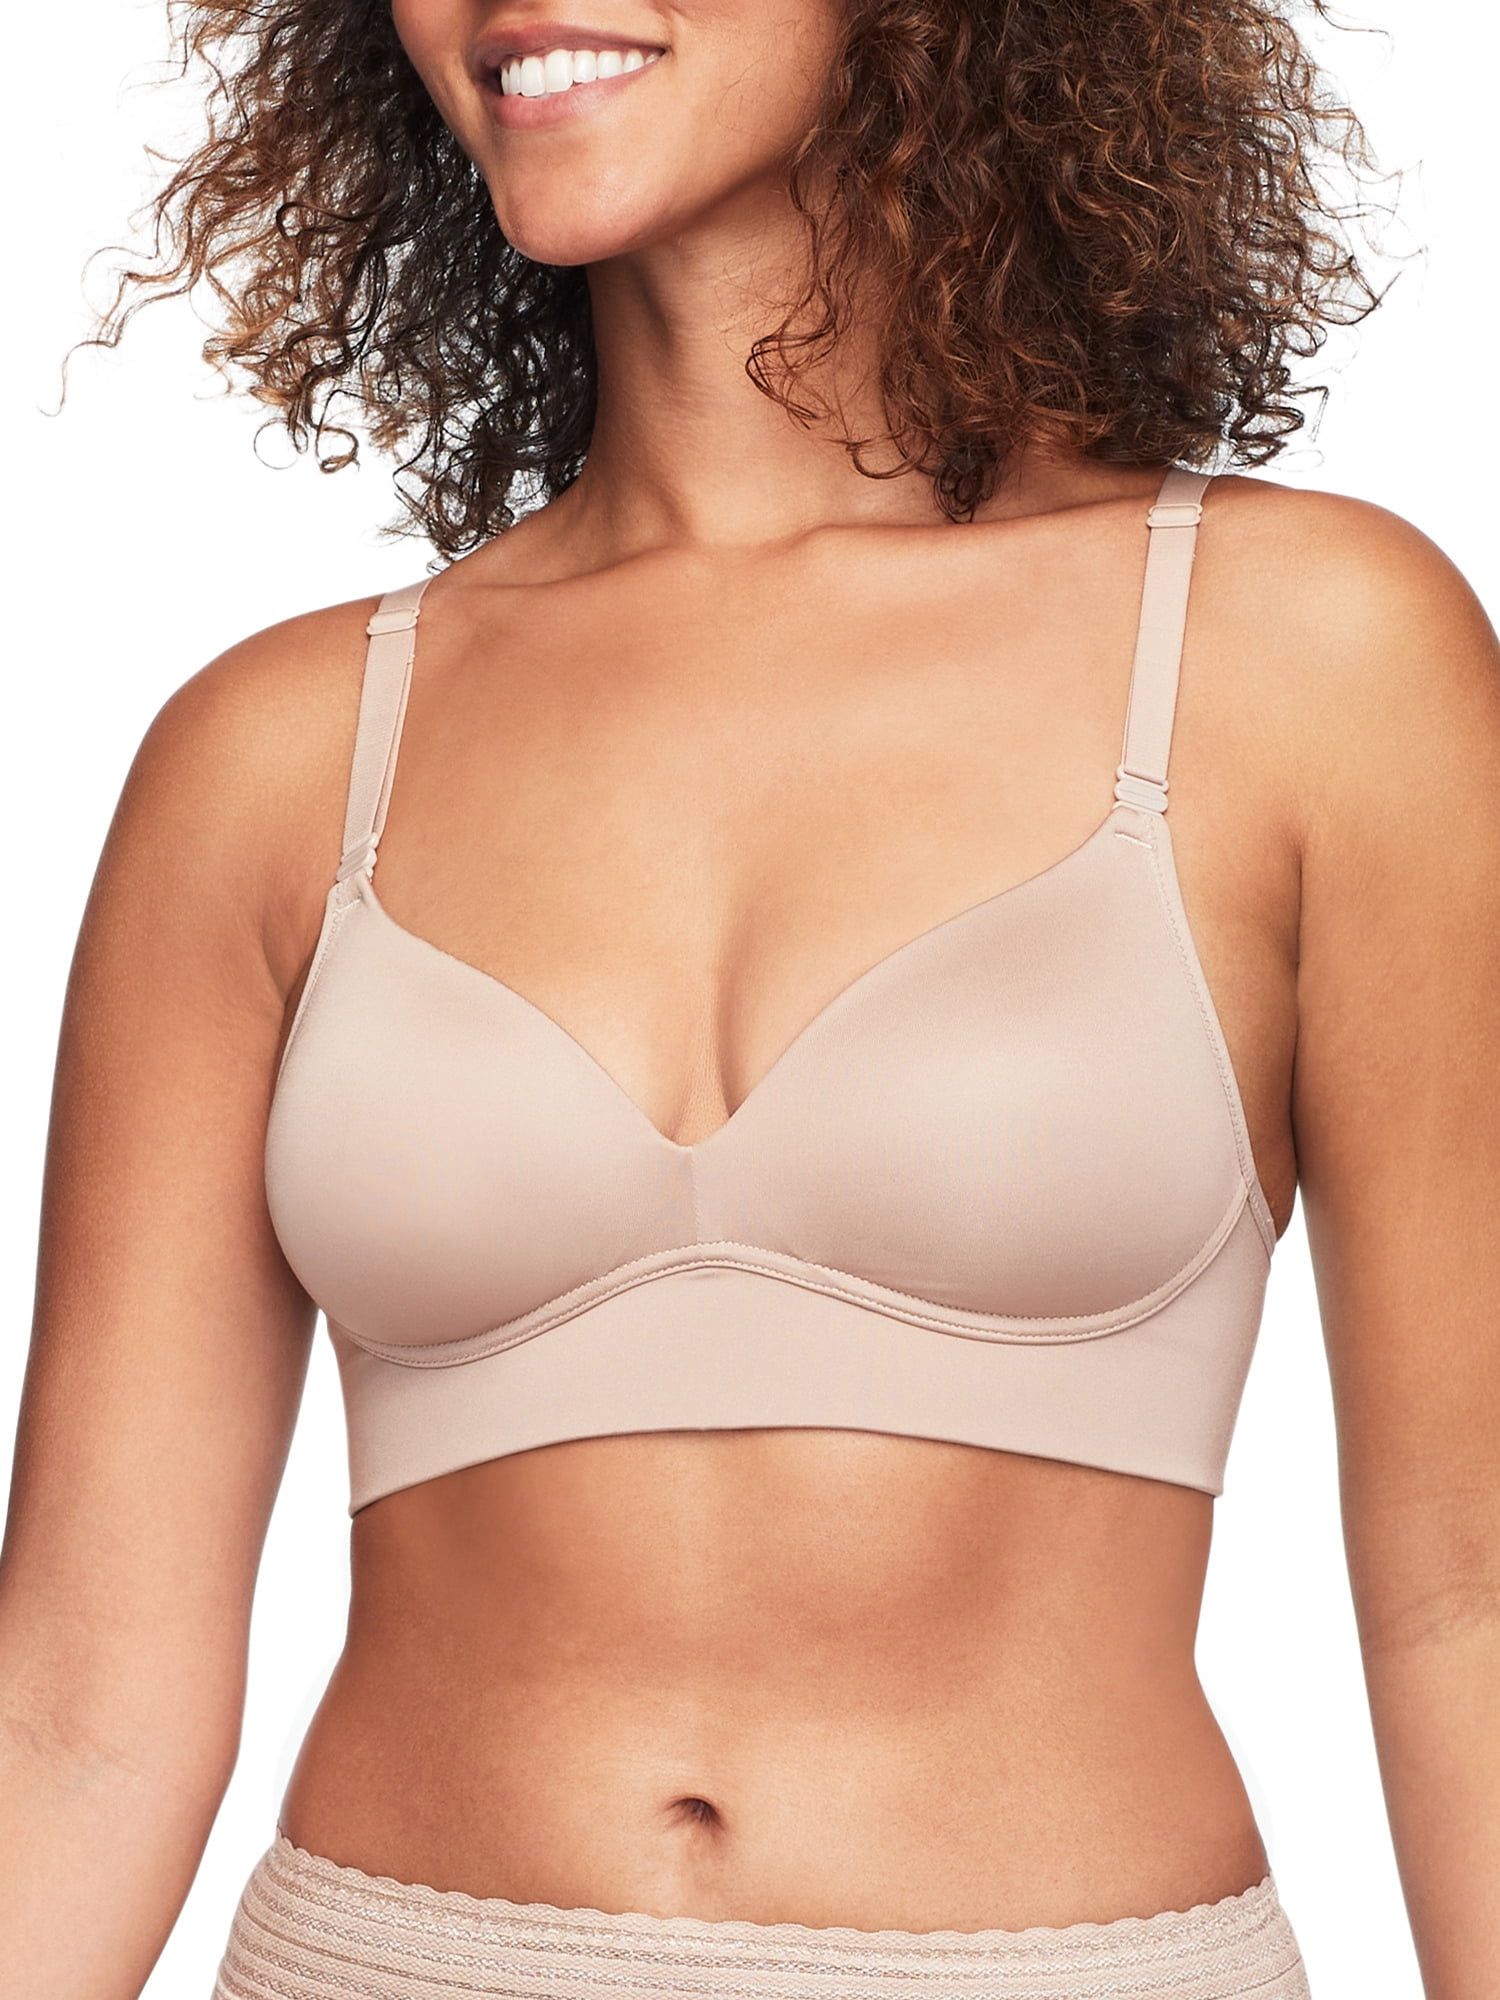 Playtex Cross Your Heart Lightly Lined Wirefree Bra 